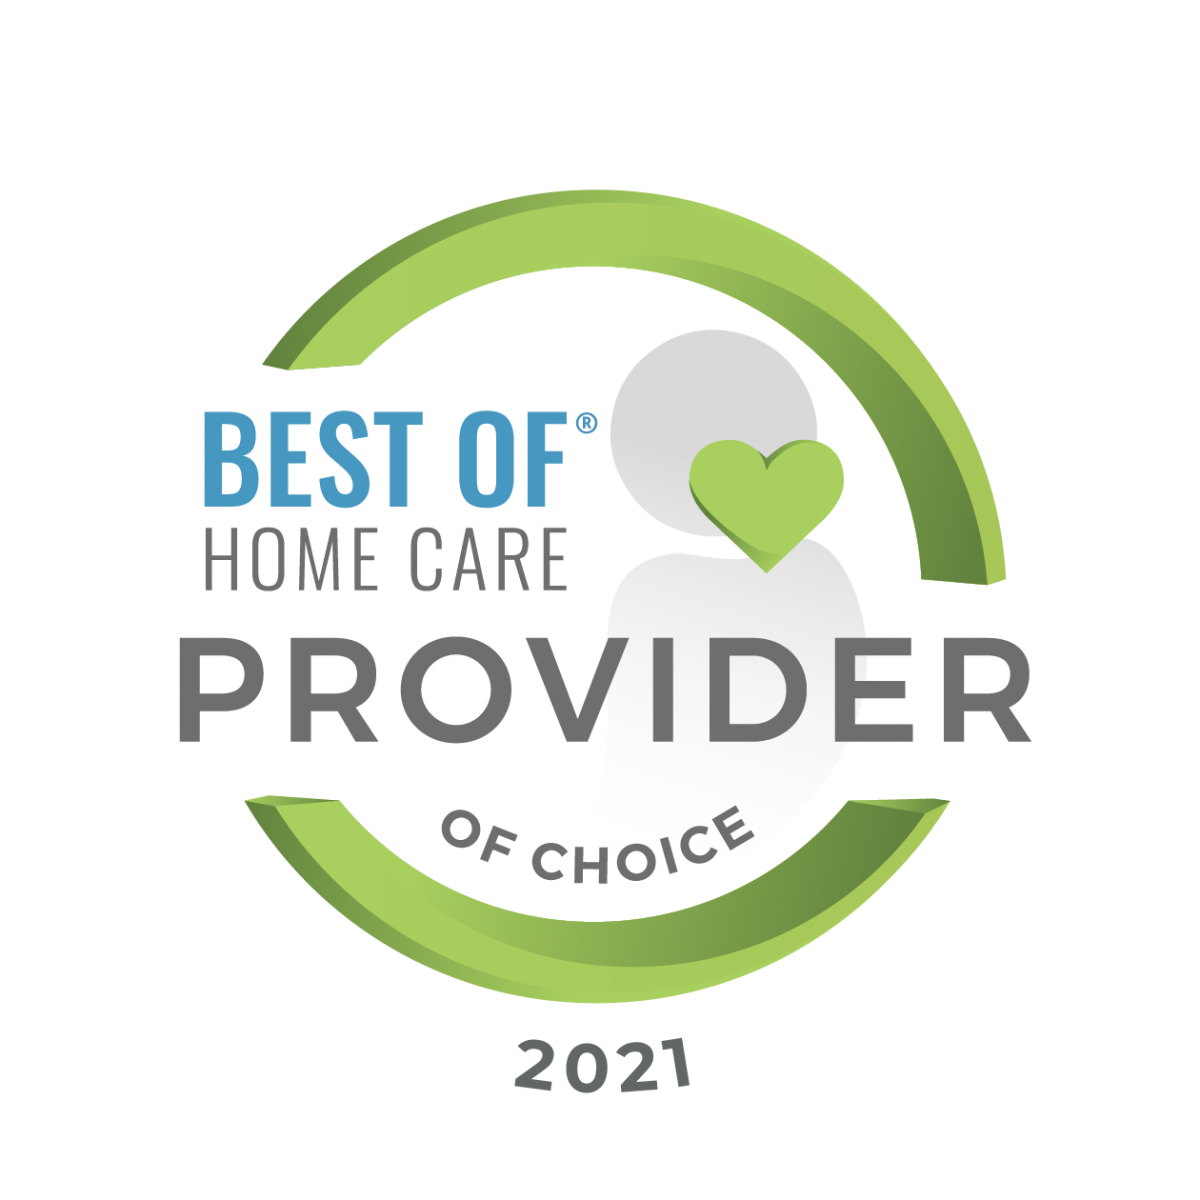 2021 Best of Home Care Provider of Choice Award